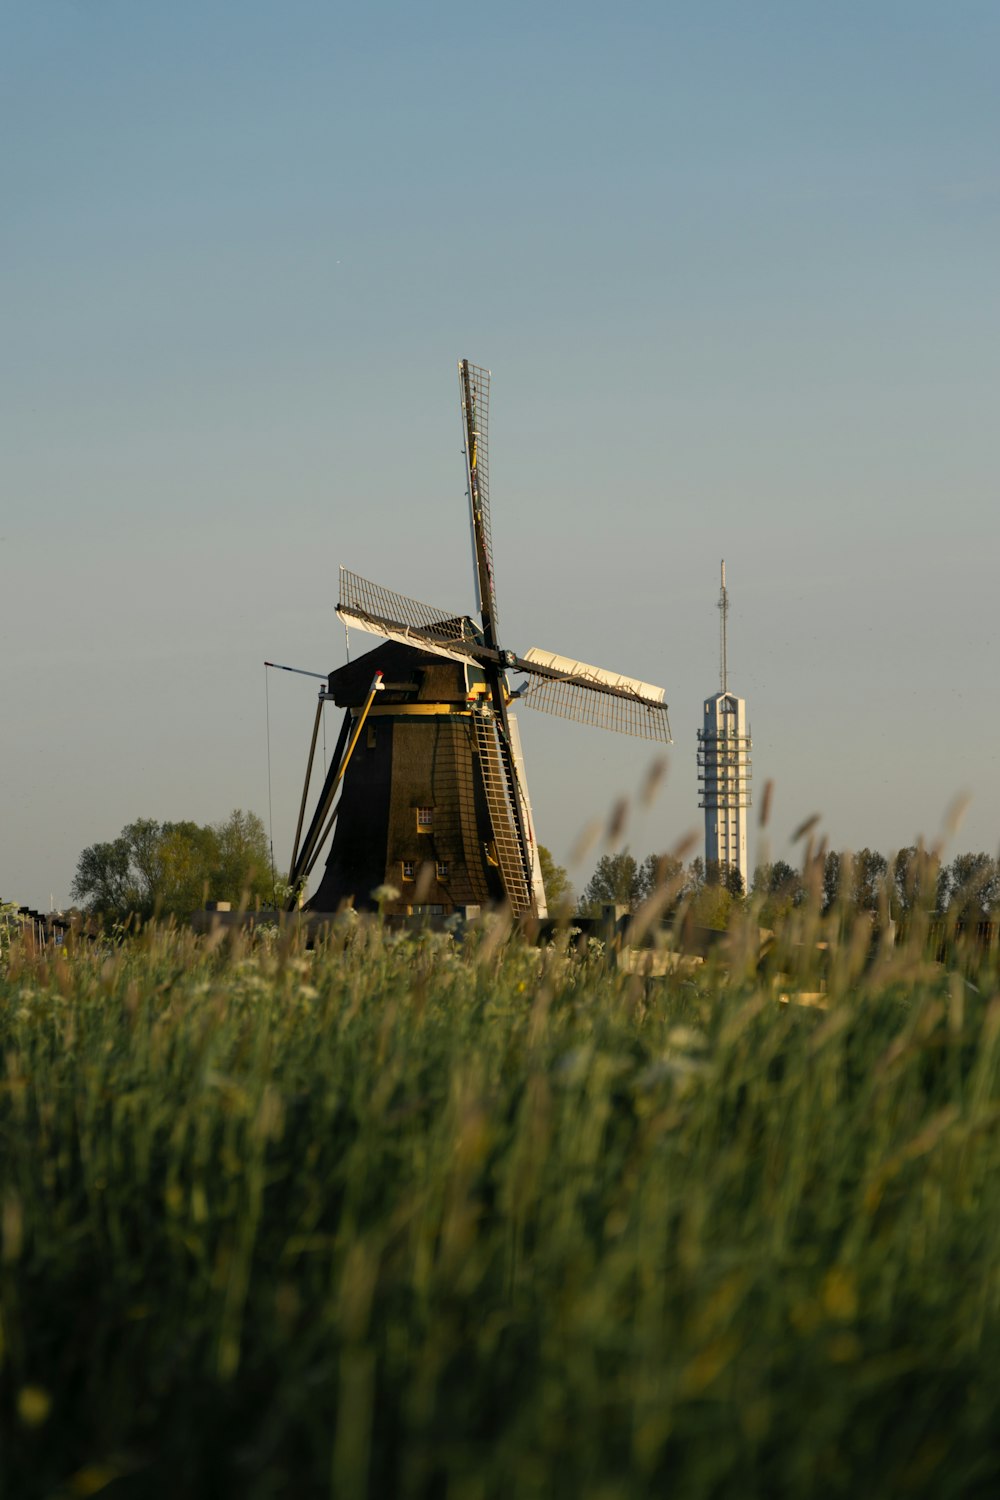 a windmill in a field with tall grass